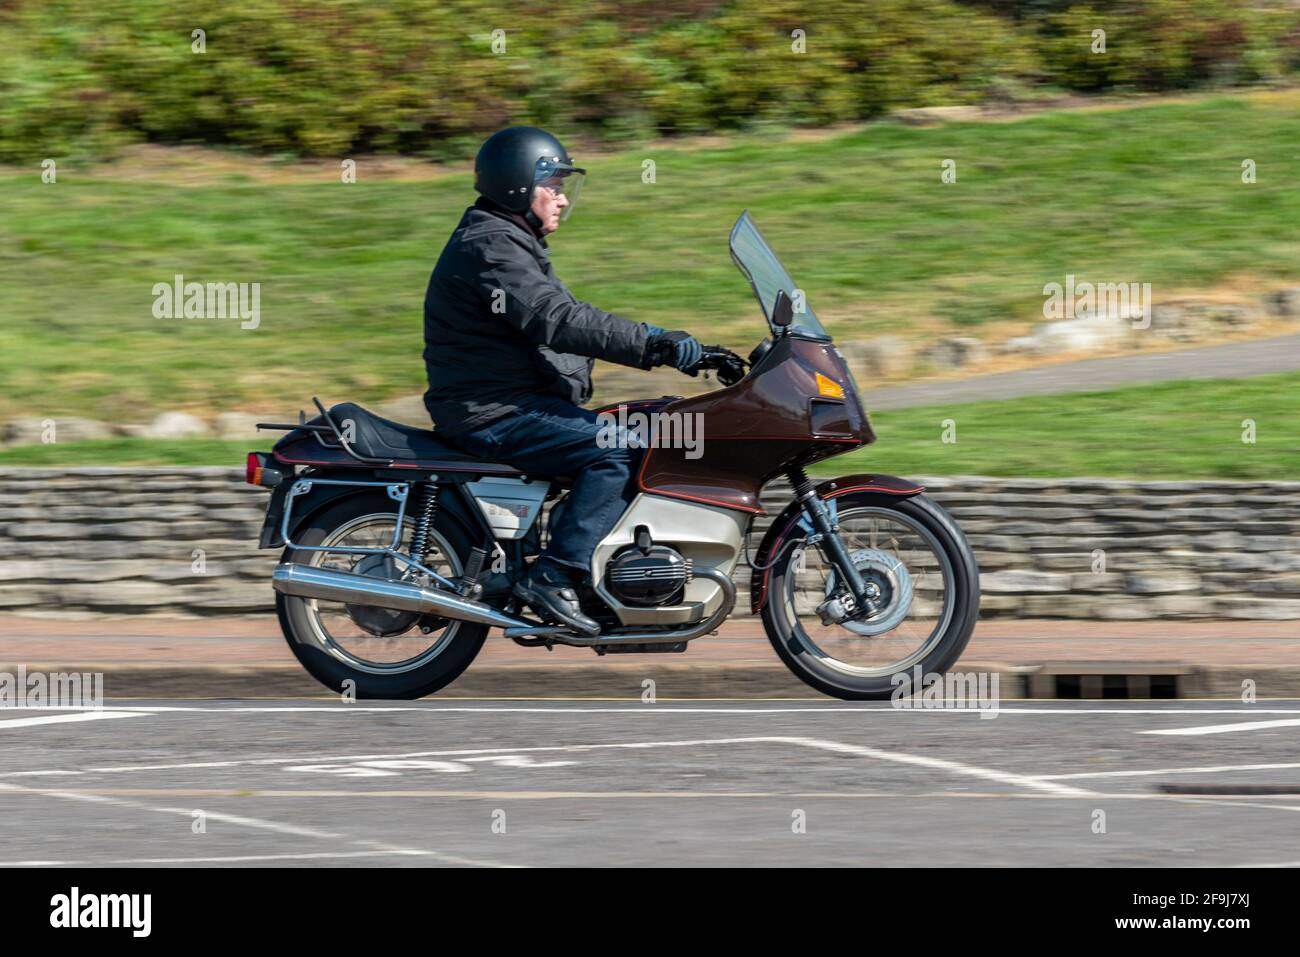 BMW R100RT Classic motorcycle, motorcyclist riding in Southend on Sea, Essex, UK, on a sunny, bright Spring day. Stock Photo